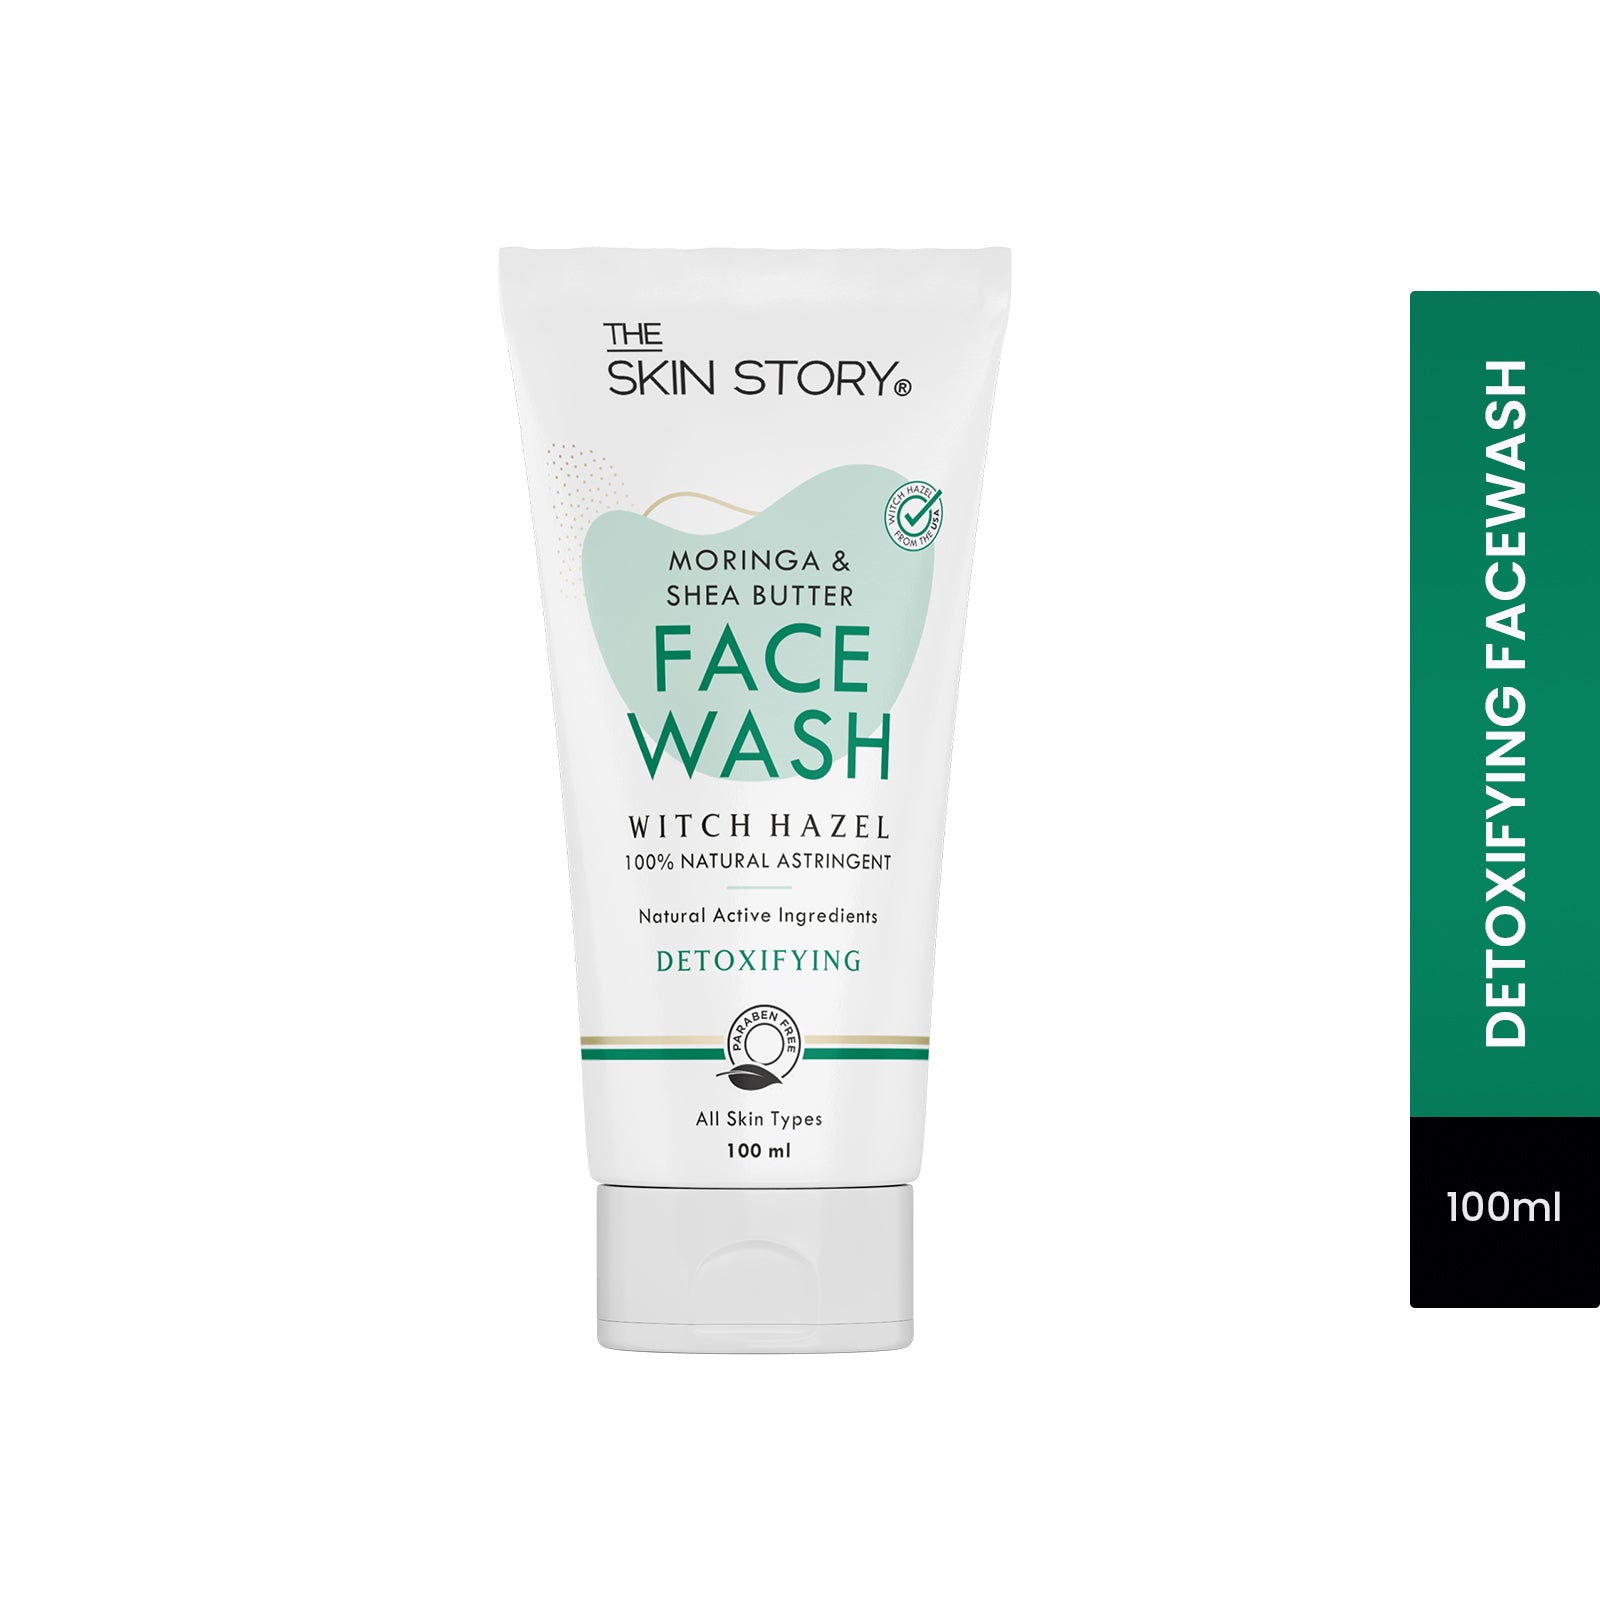 The Skin Story Pore Cleansing Facewash | Gentle Skin Cleanser | All Skin Types | Moringa & Shea Butter | 100ml